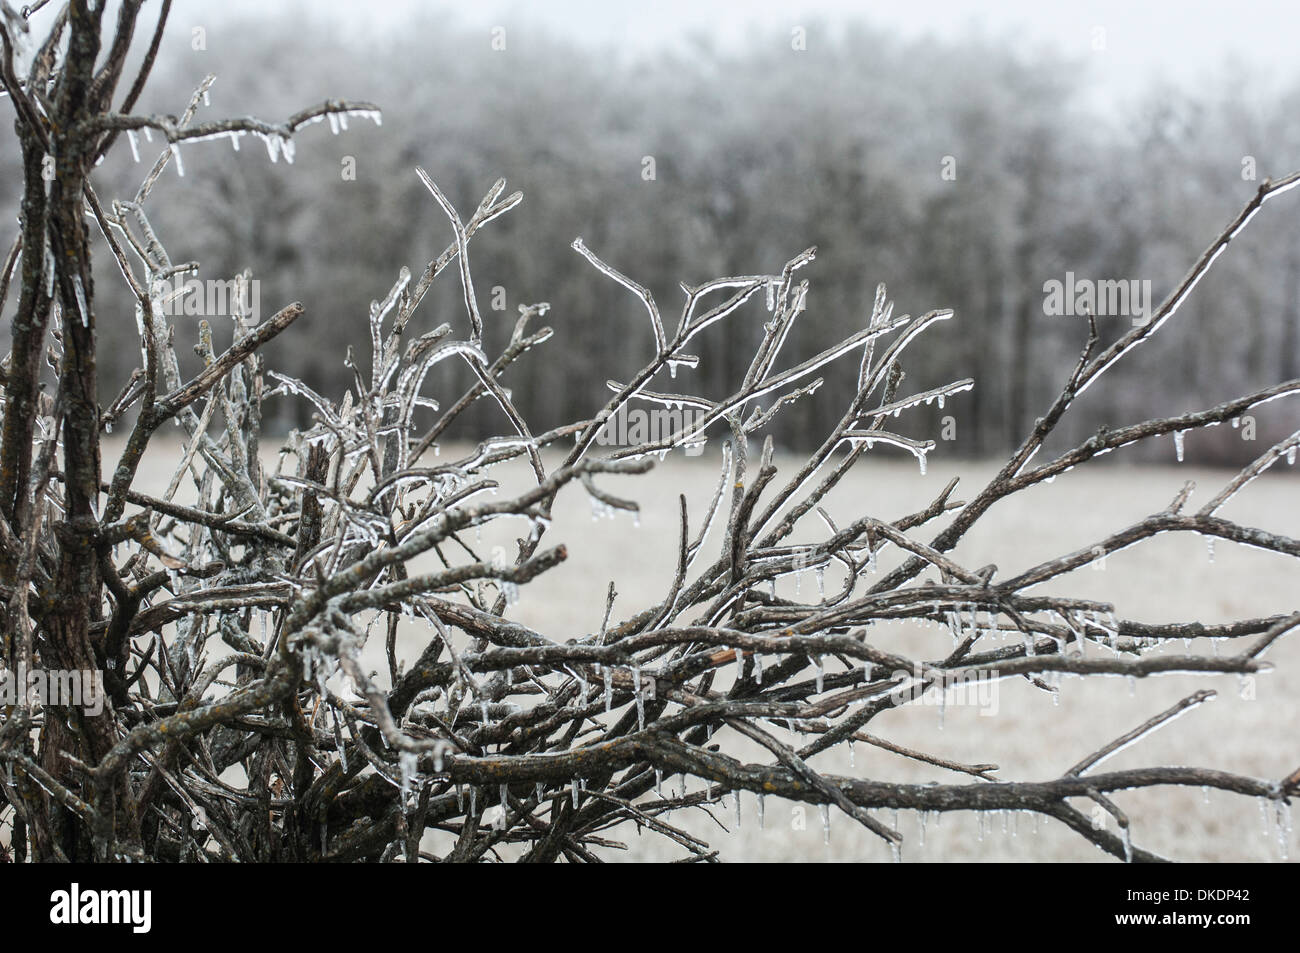 Willow branches covered in ice and icicles after a freezing rain weather event Stock Photo